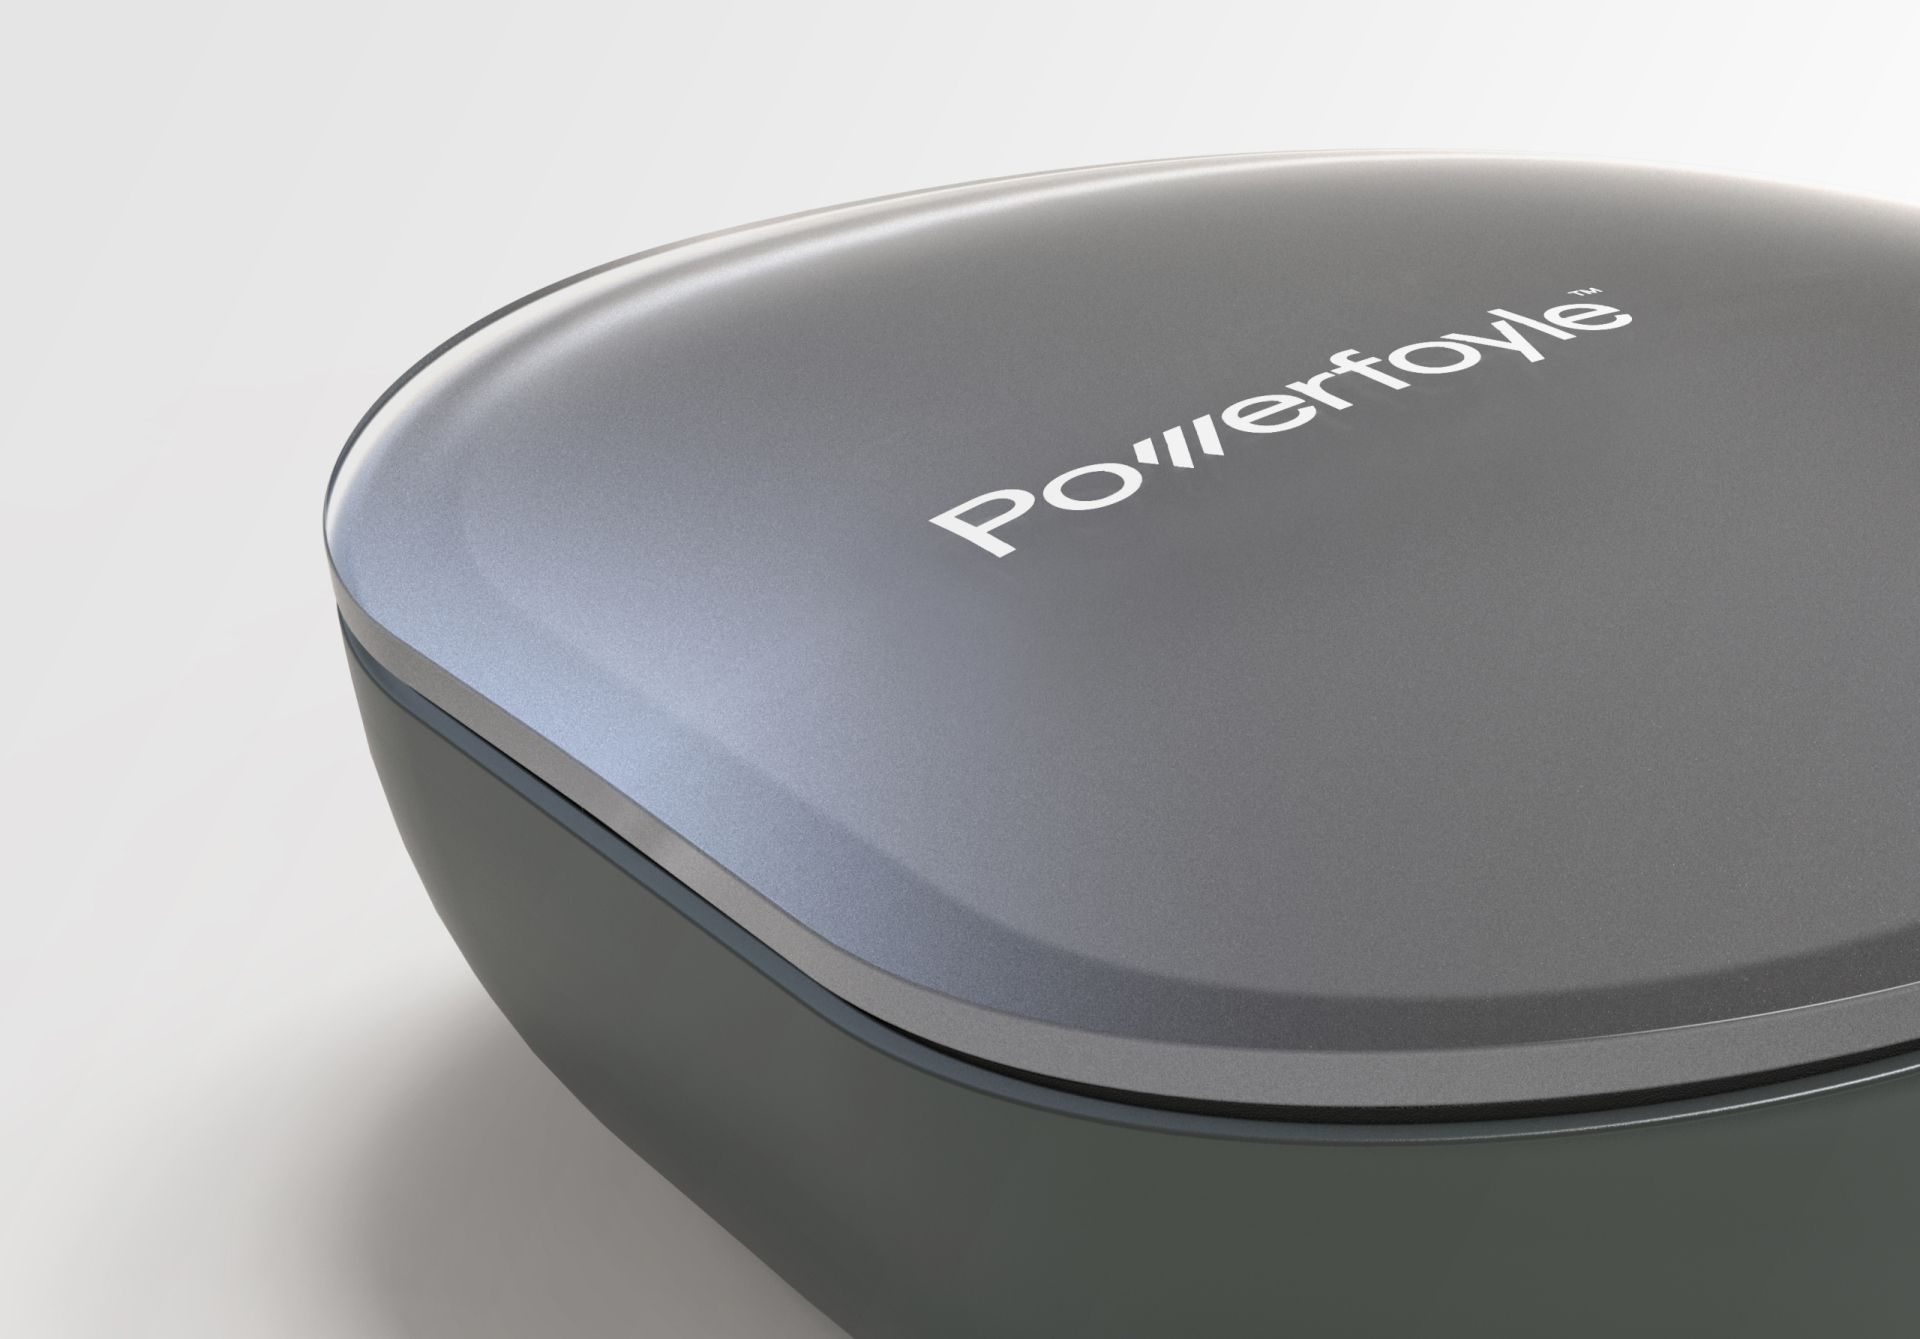 Powerfoyle can power broad range of IoT devices